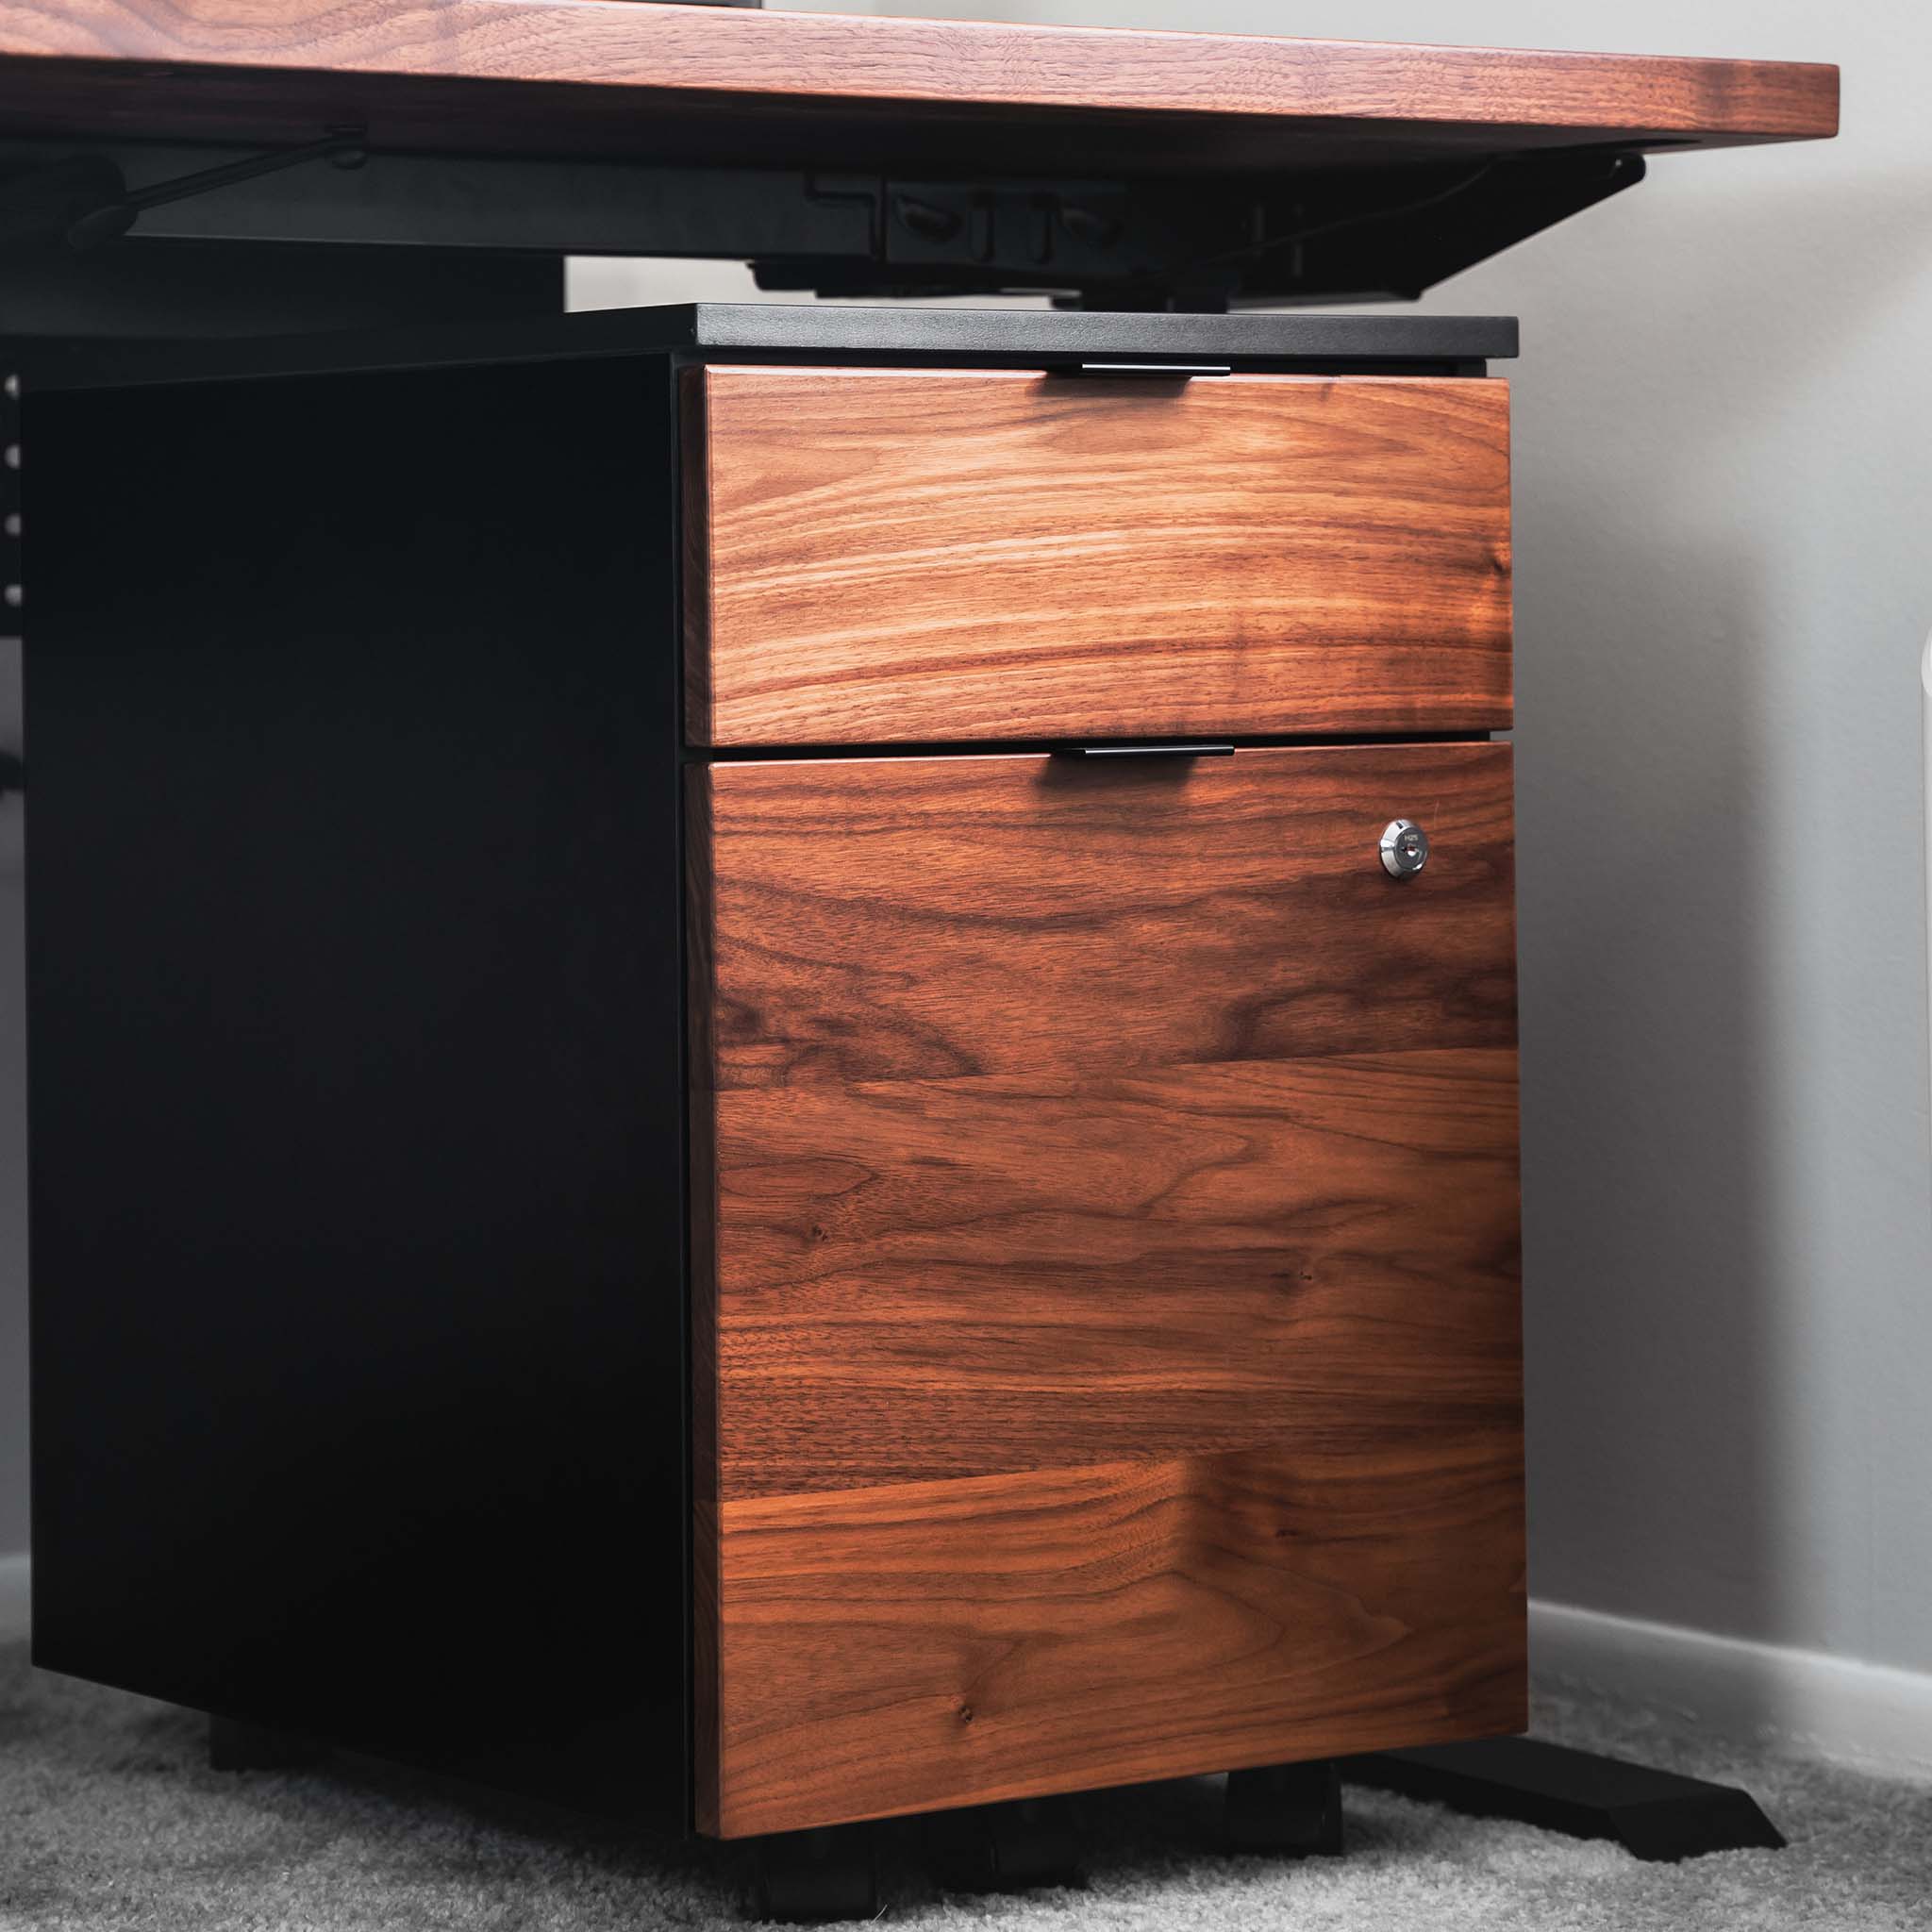 Neat Filing Cabinet - Cabinet-Color-Black/Front-Panels-Walnut - Cabinet-Color-Noir/Front-Panels-Noyer